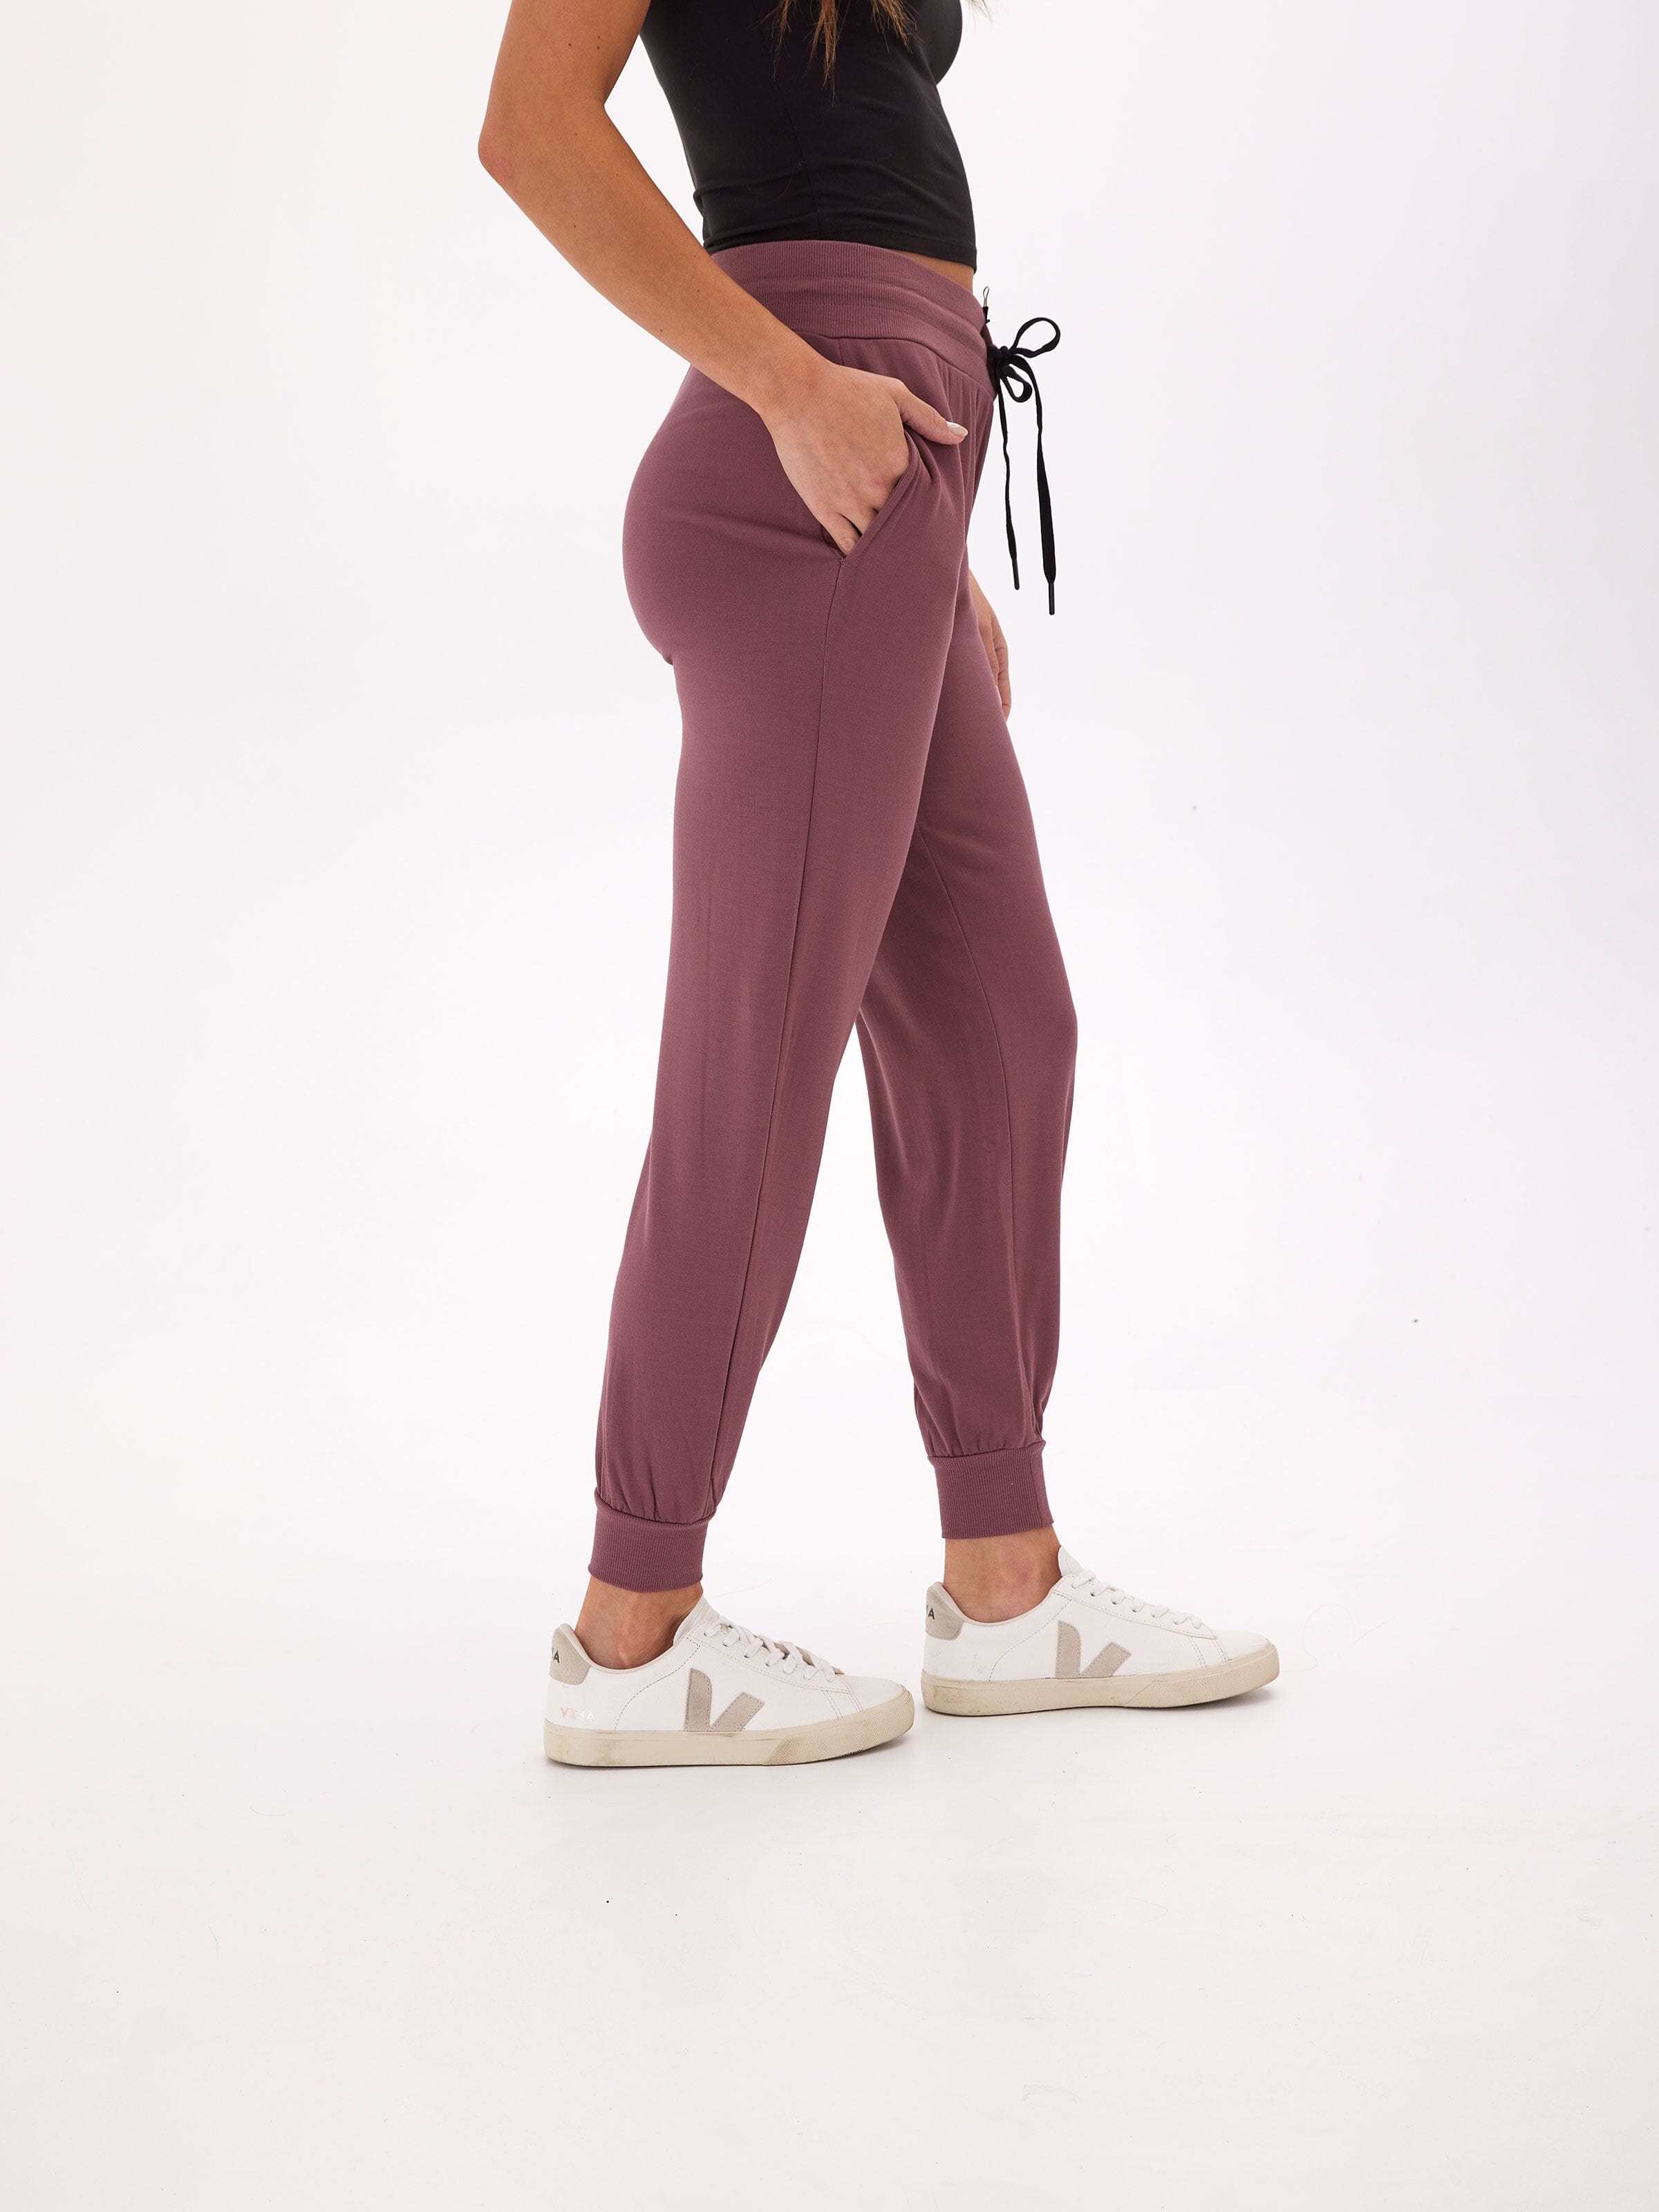 Women's Sweatpants – Threads 4 Thought